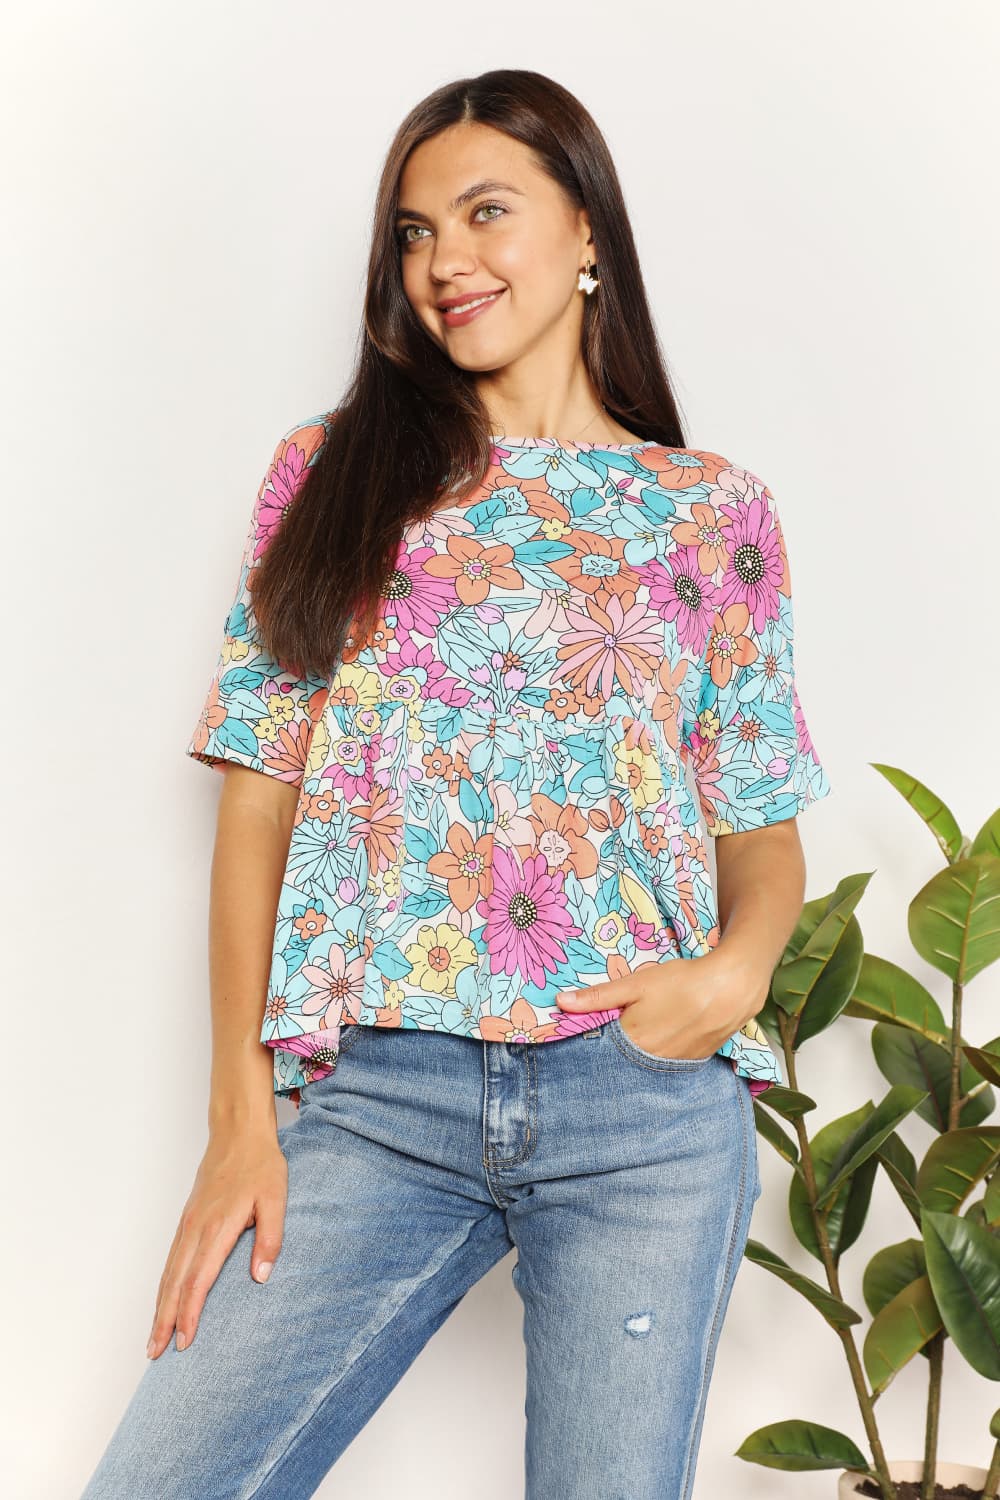 Floral Round Neck Babydoll Top - Floral / S - Camis & Tops - Shirts & Tops - 1 - 2024